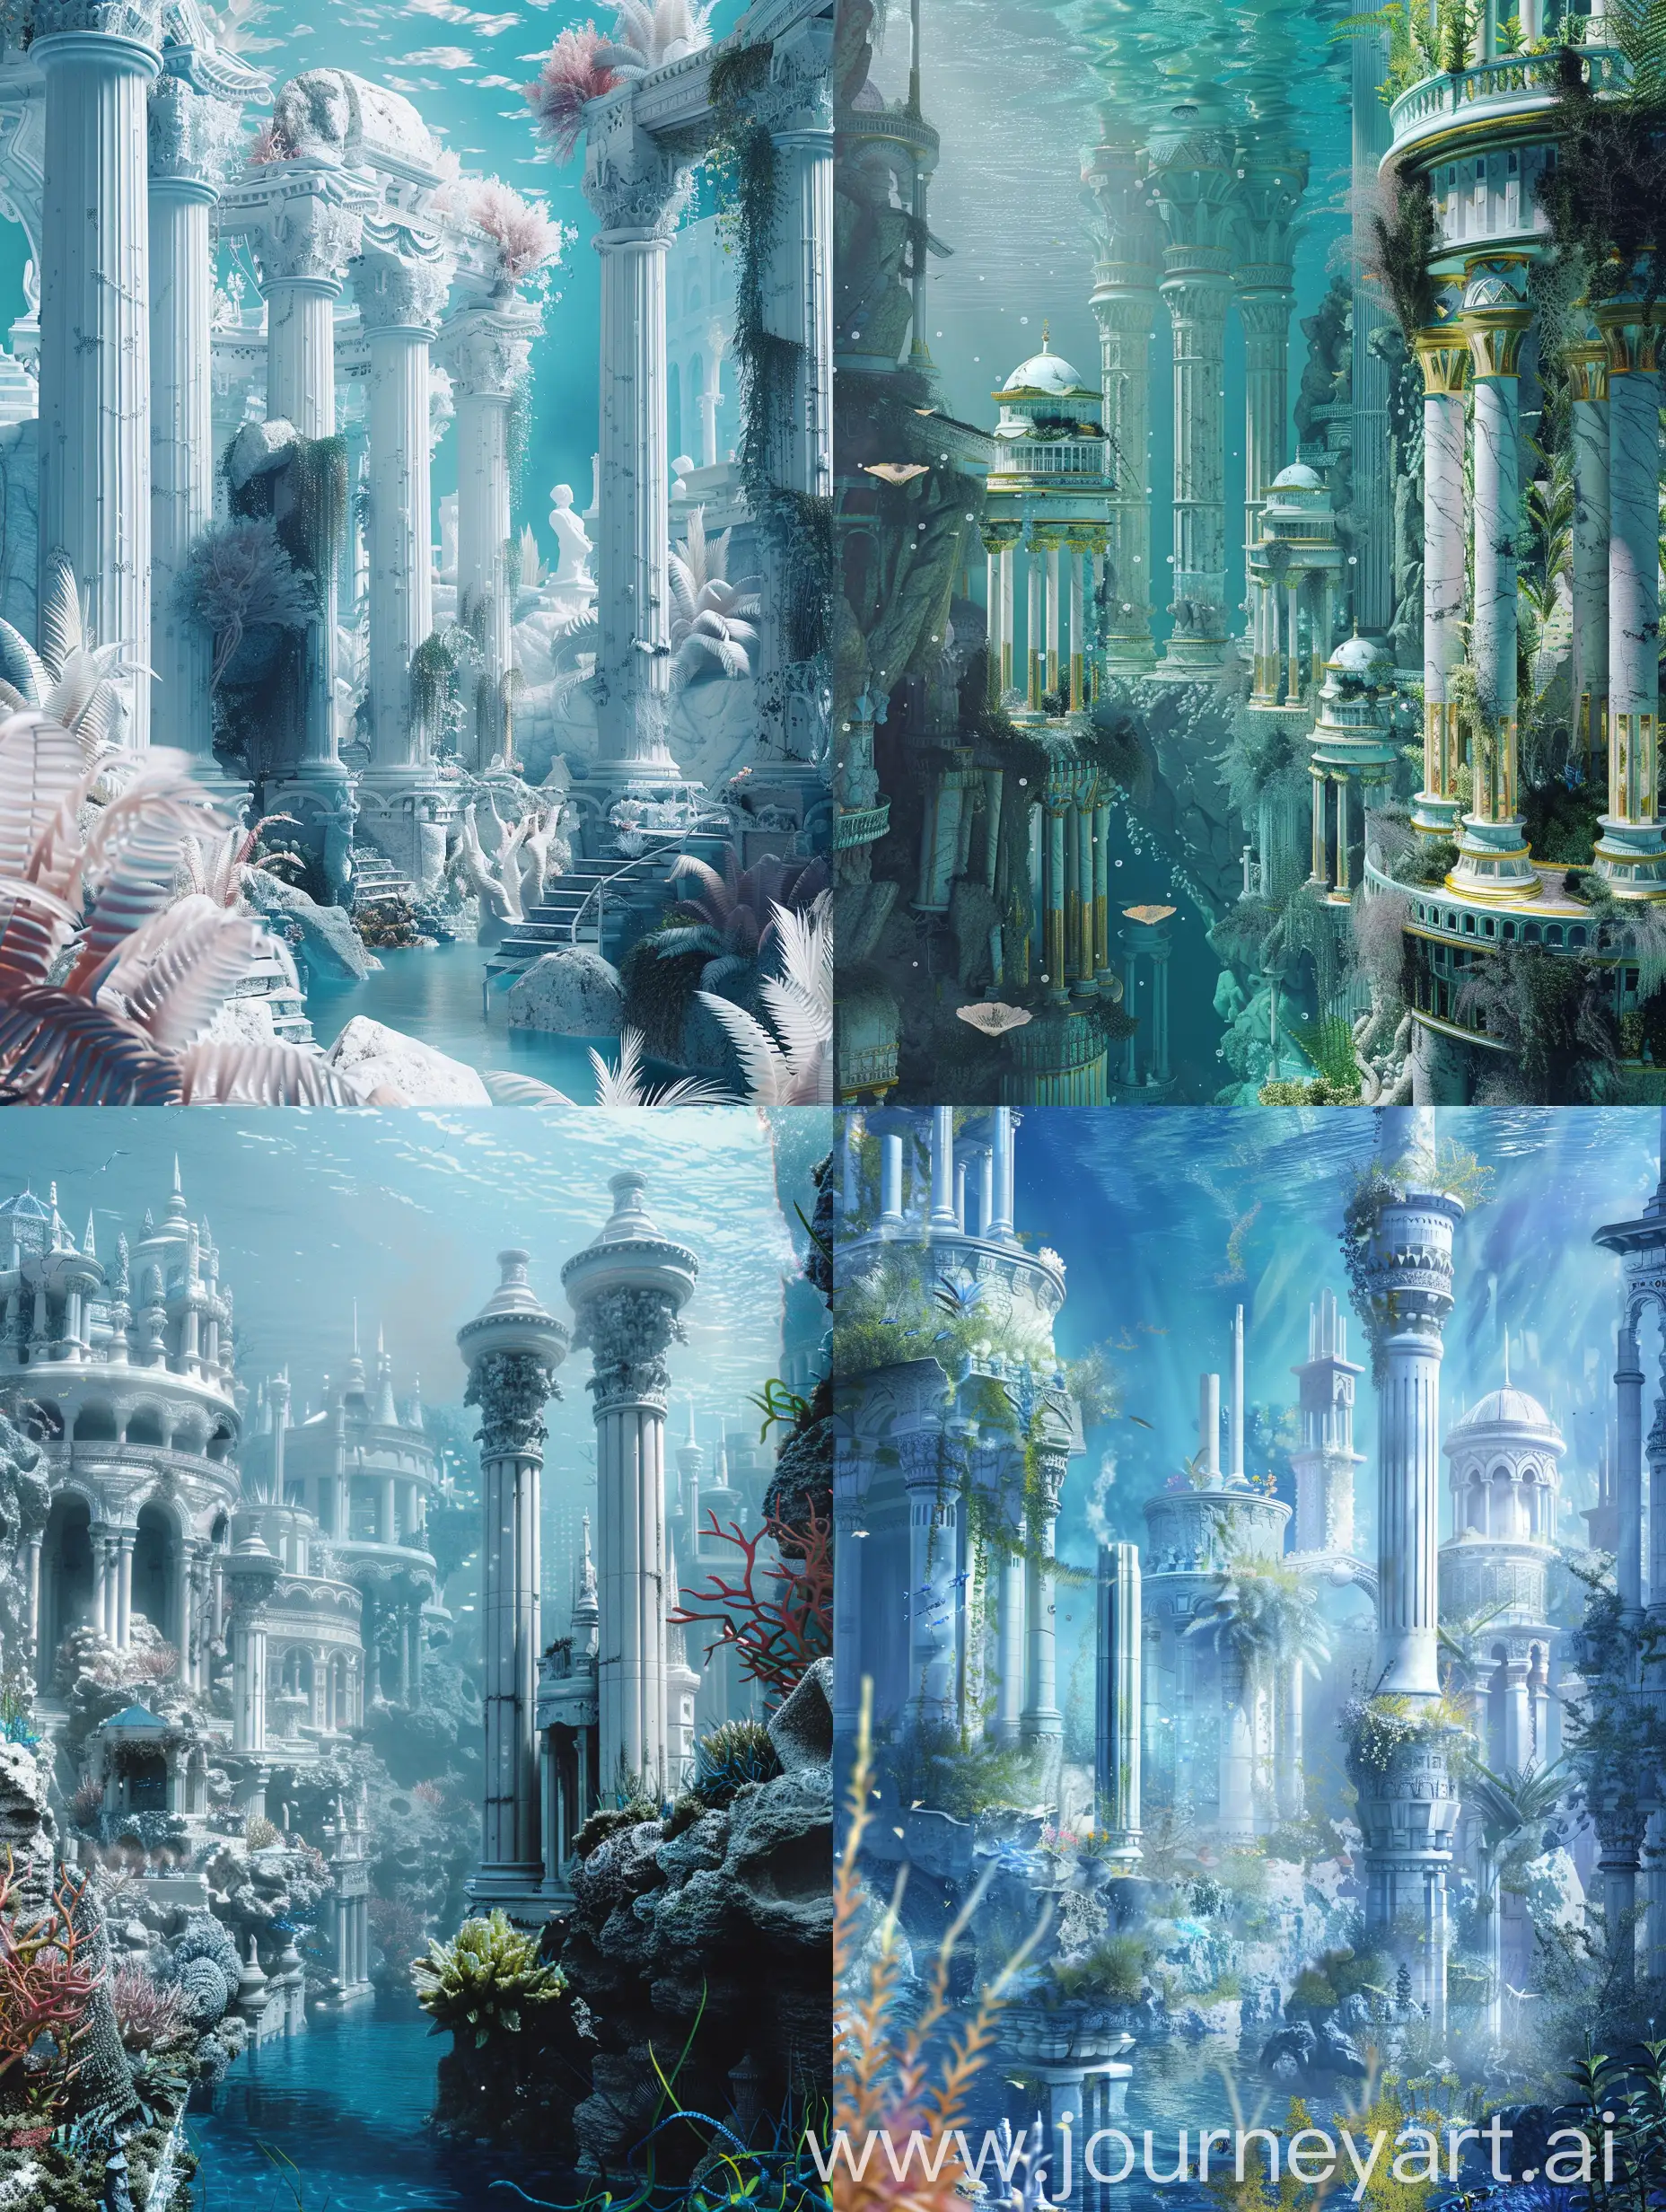 Fantasy-Underwater-City-with-White-Marble-Towers-and-Ancient-Roman-Architecture